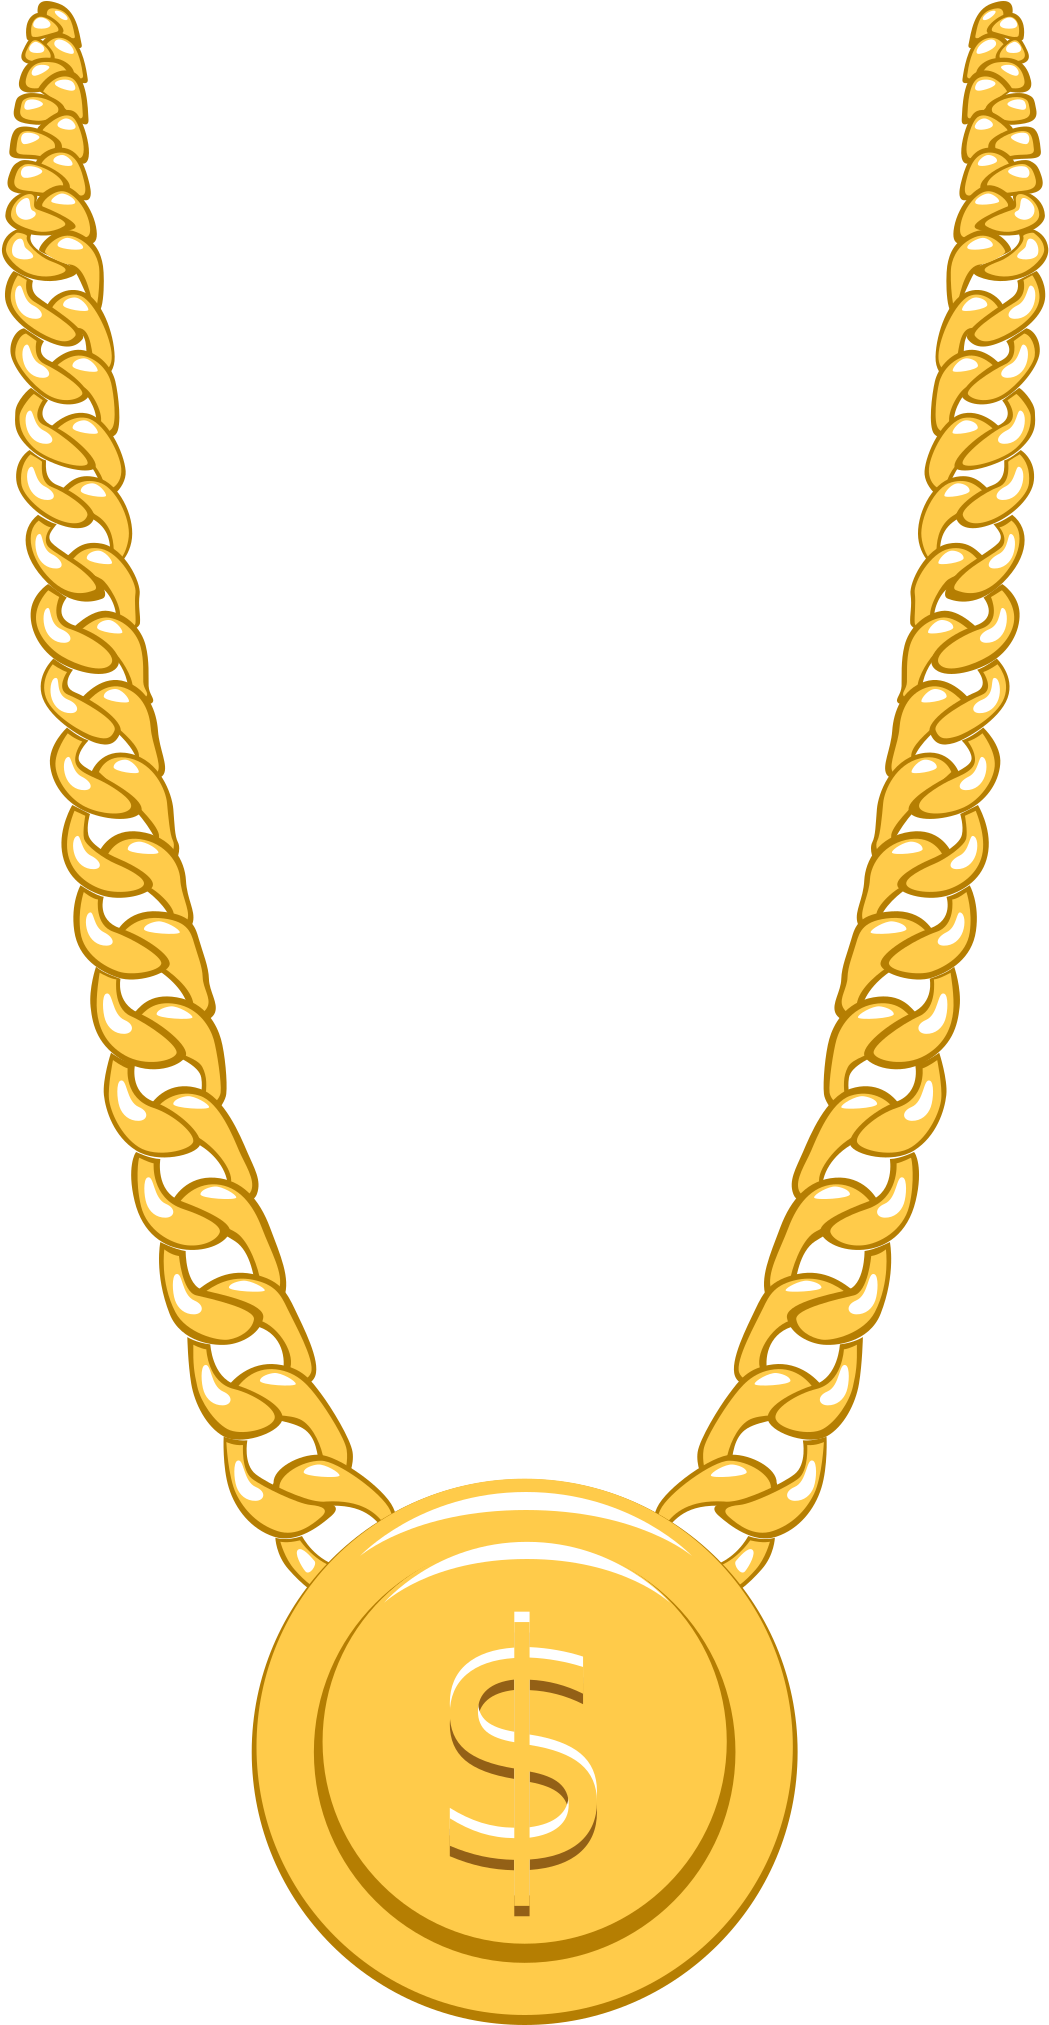 A Gold Chain Necklace With A Round Pendant